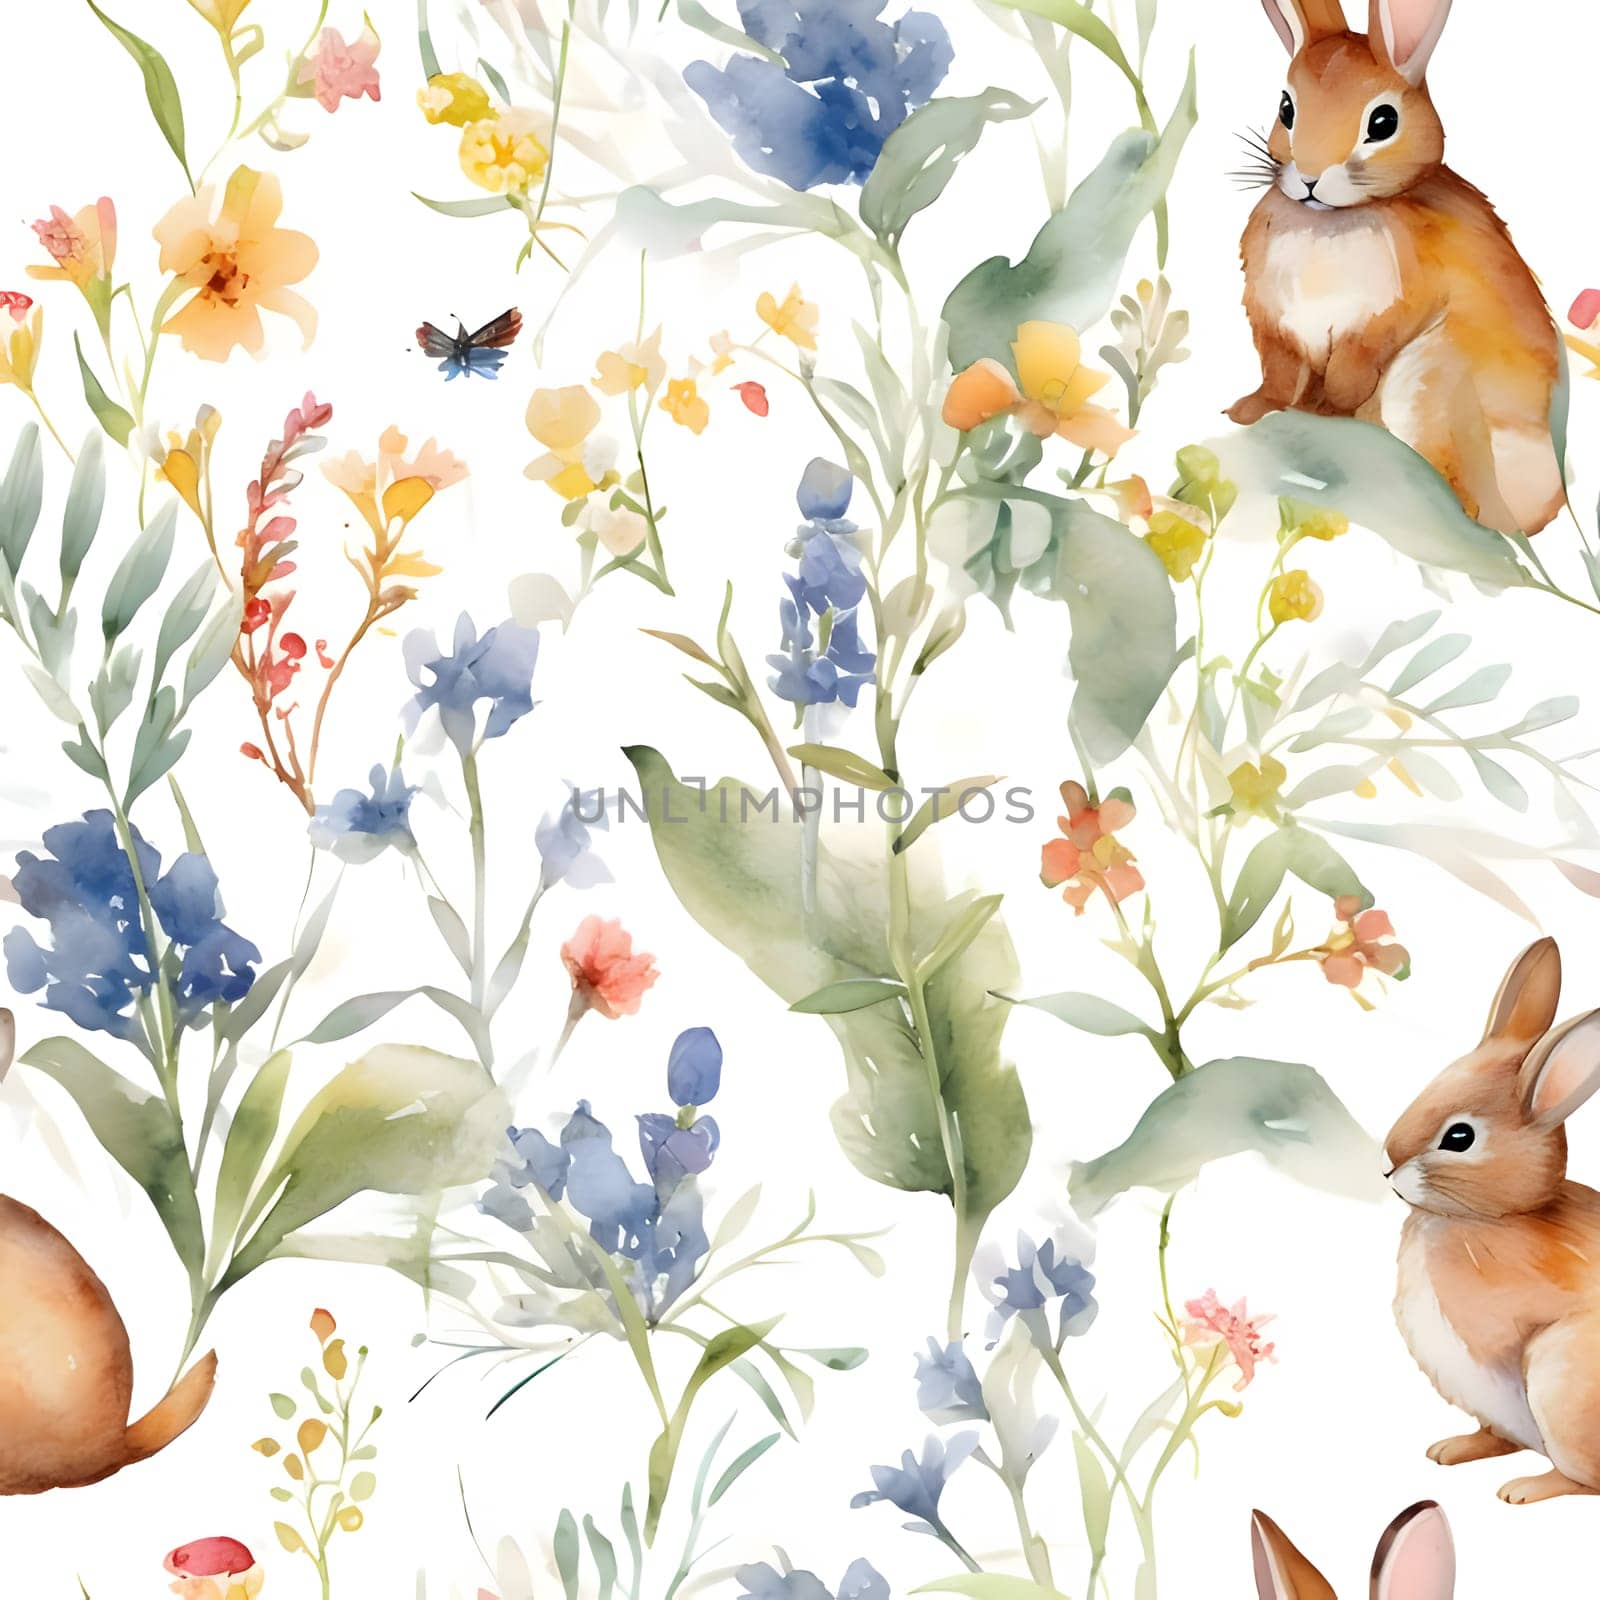 Patterns and banners backgrounds: Seamless pattern with watercolor flowers and rabbits. Hand painted illustration